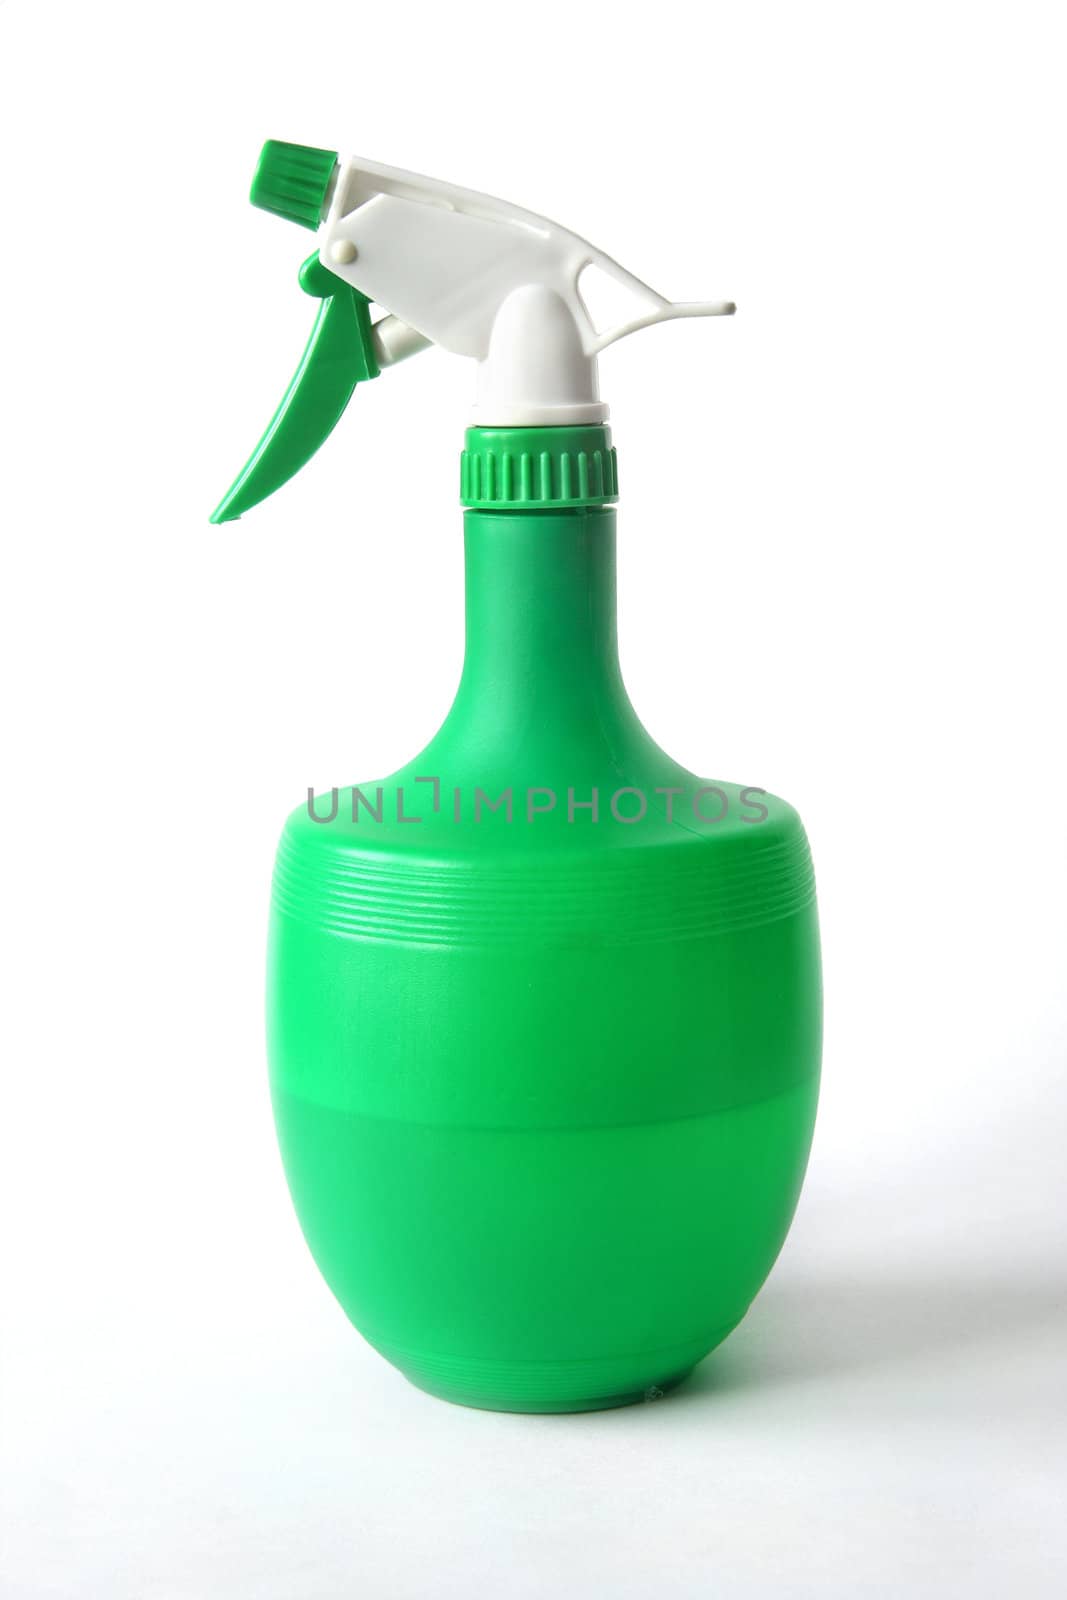 Sprayer of green color on a white background